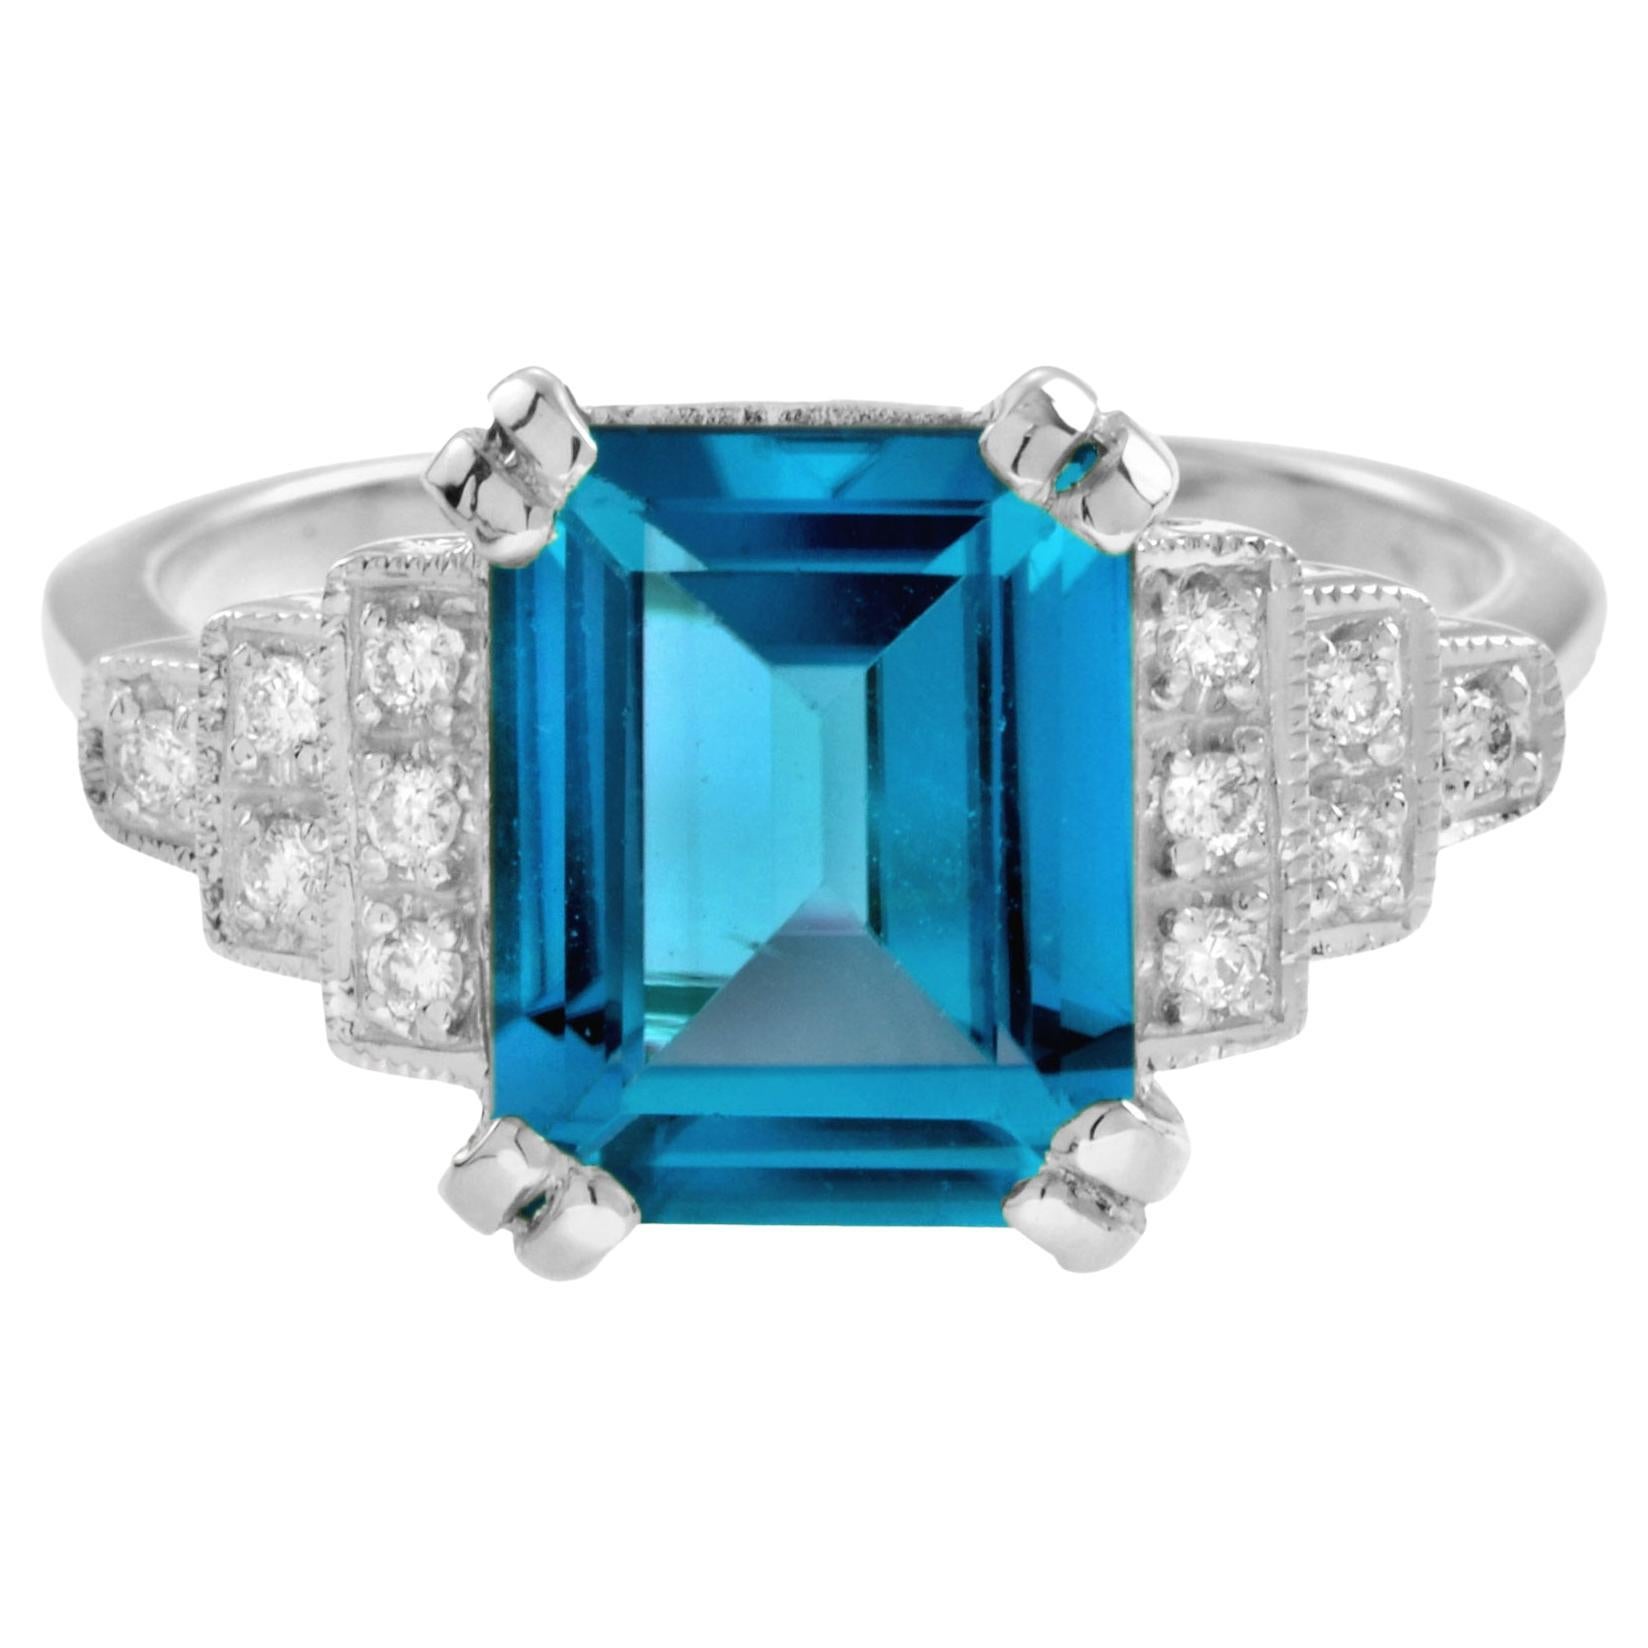 Emerald Cut London Blue Topaz and Step Diamond Engagement Ring in 18K White Gold